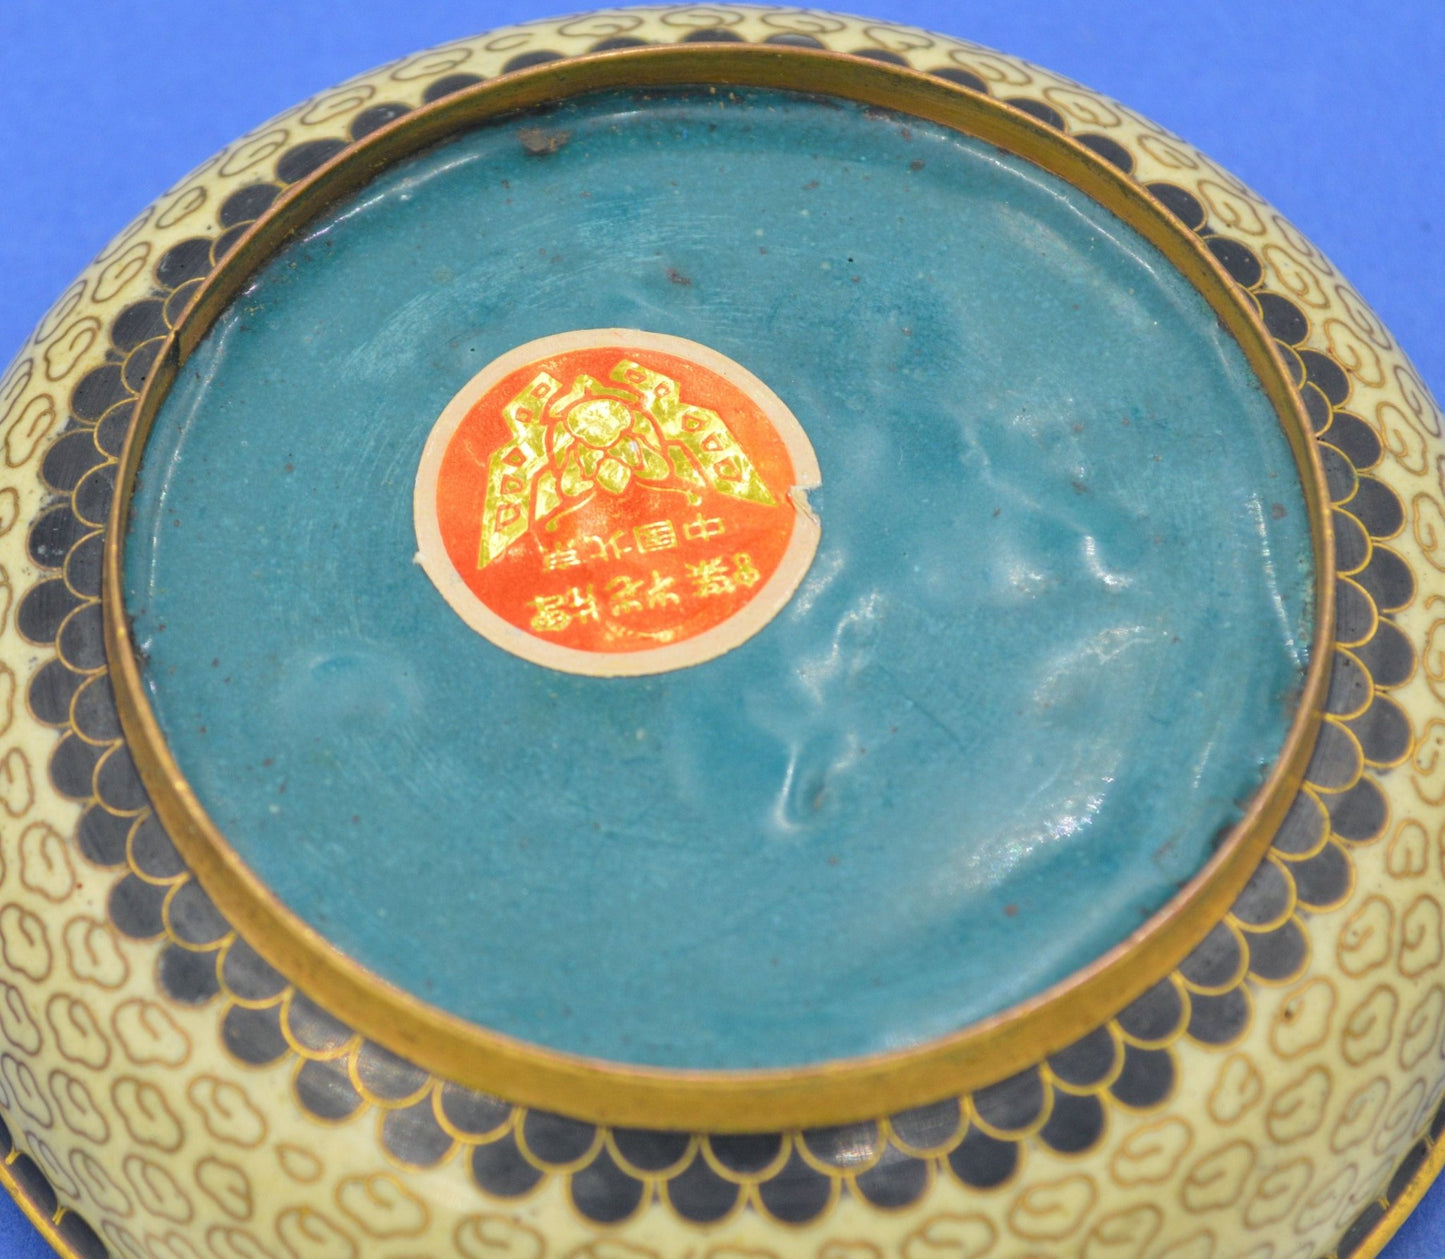 CLOISONNÉ ENAMELLED TRINKET POT(PREVIOUSLY OWNED) VERY GOOD CONDITION - TMD167207